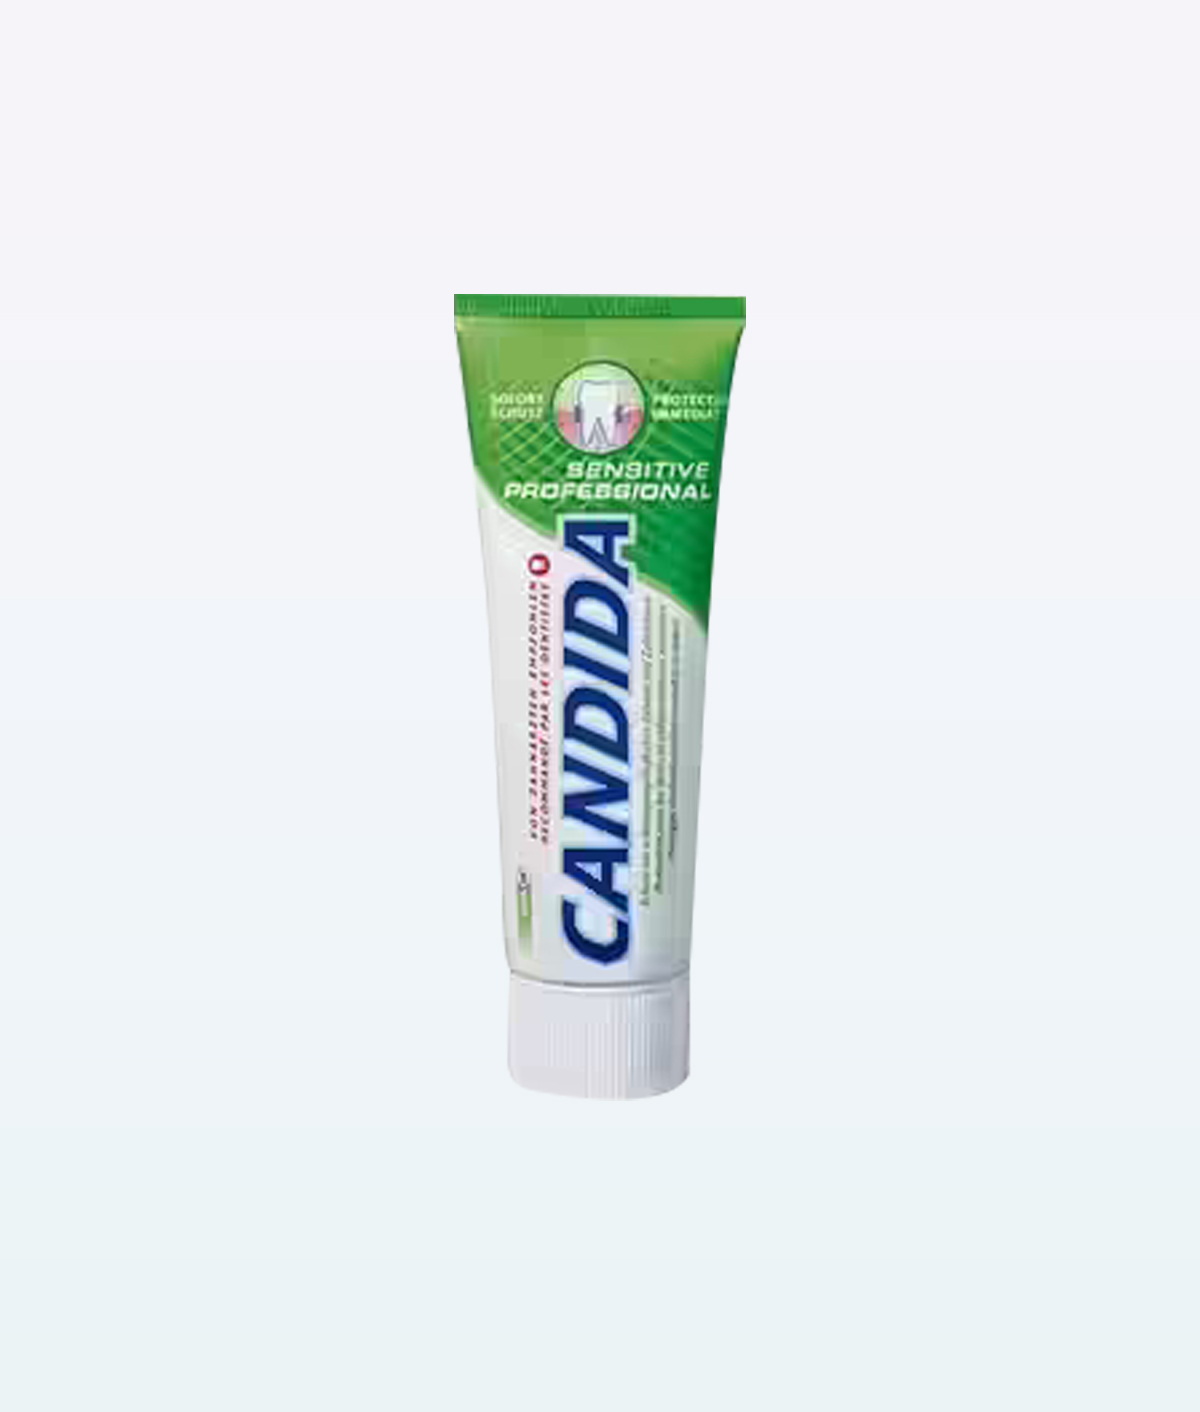 Candida-Toothpaste-Sensitive-Professional